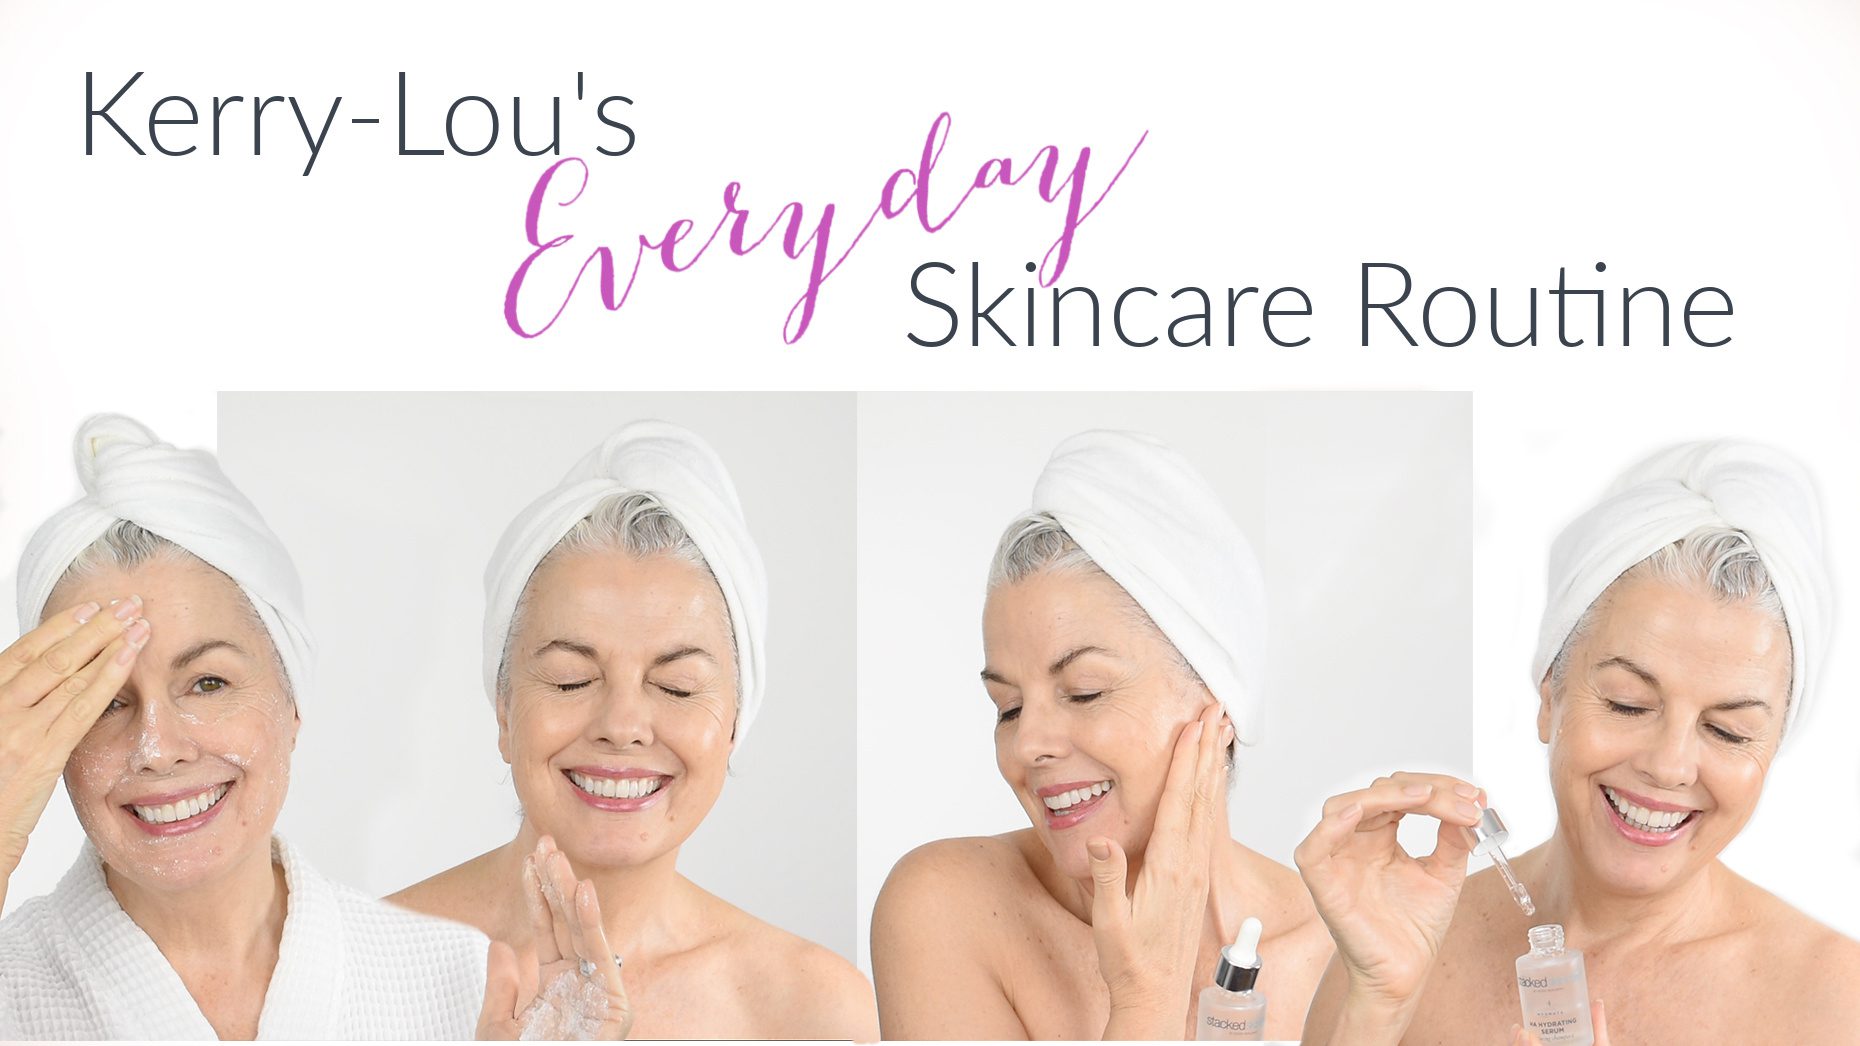 Kerry-Lou’s Everyday Skincare Routine